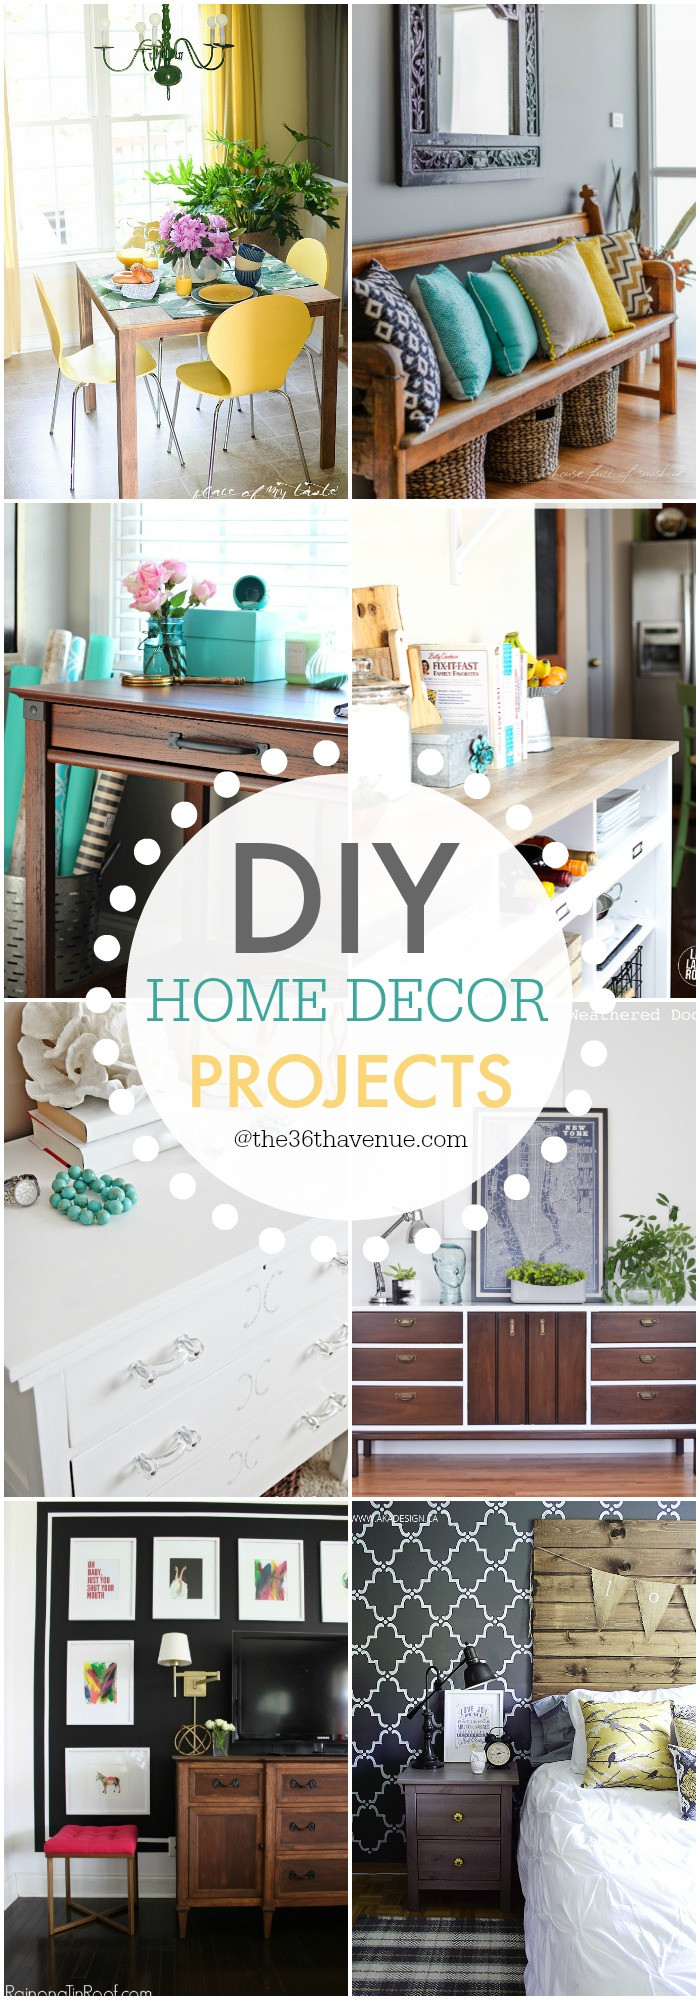 DIY Project Ideas For Homes
 DIY Home Decor Projects and Ideas The 36th AVENUE